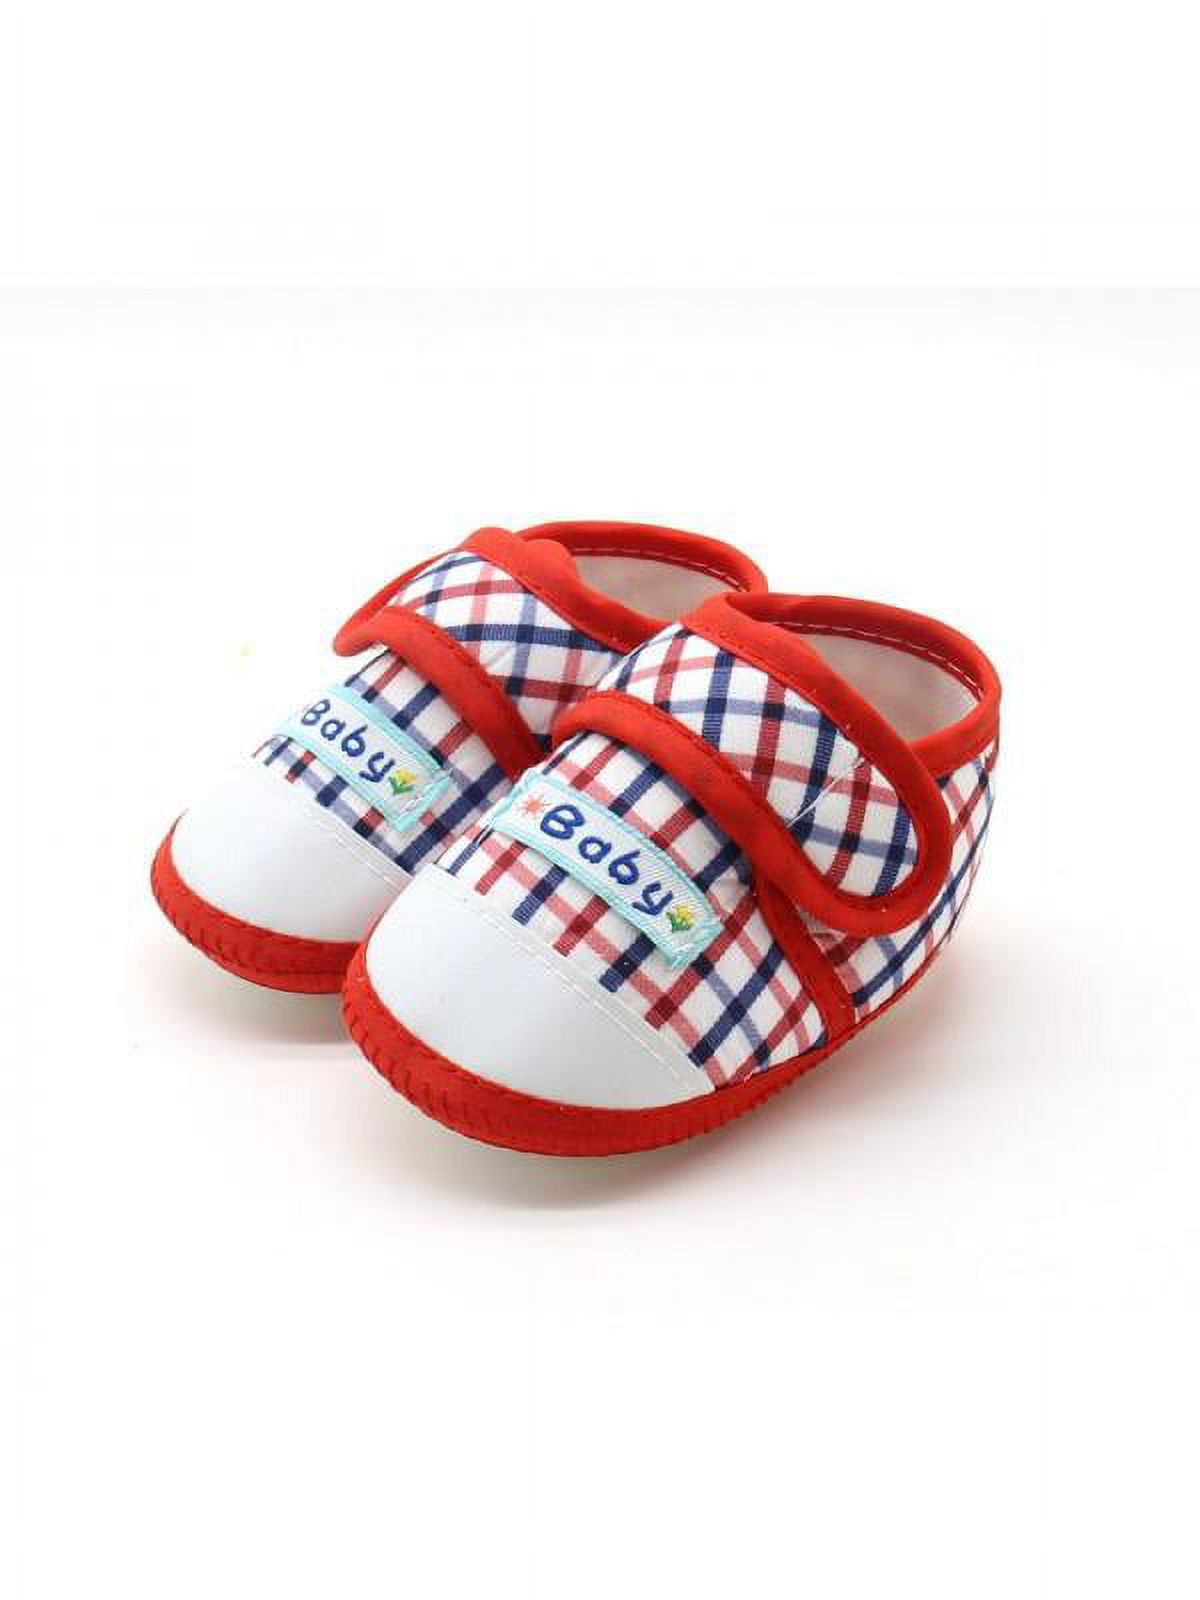 Baby Toddler Girl Boy Shoes Sneakers Soft Sole First Walker - image 3 of 8